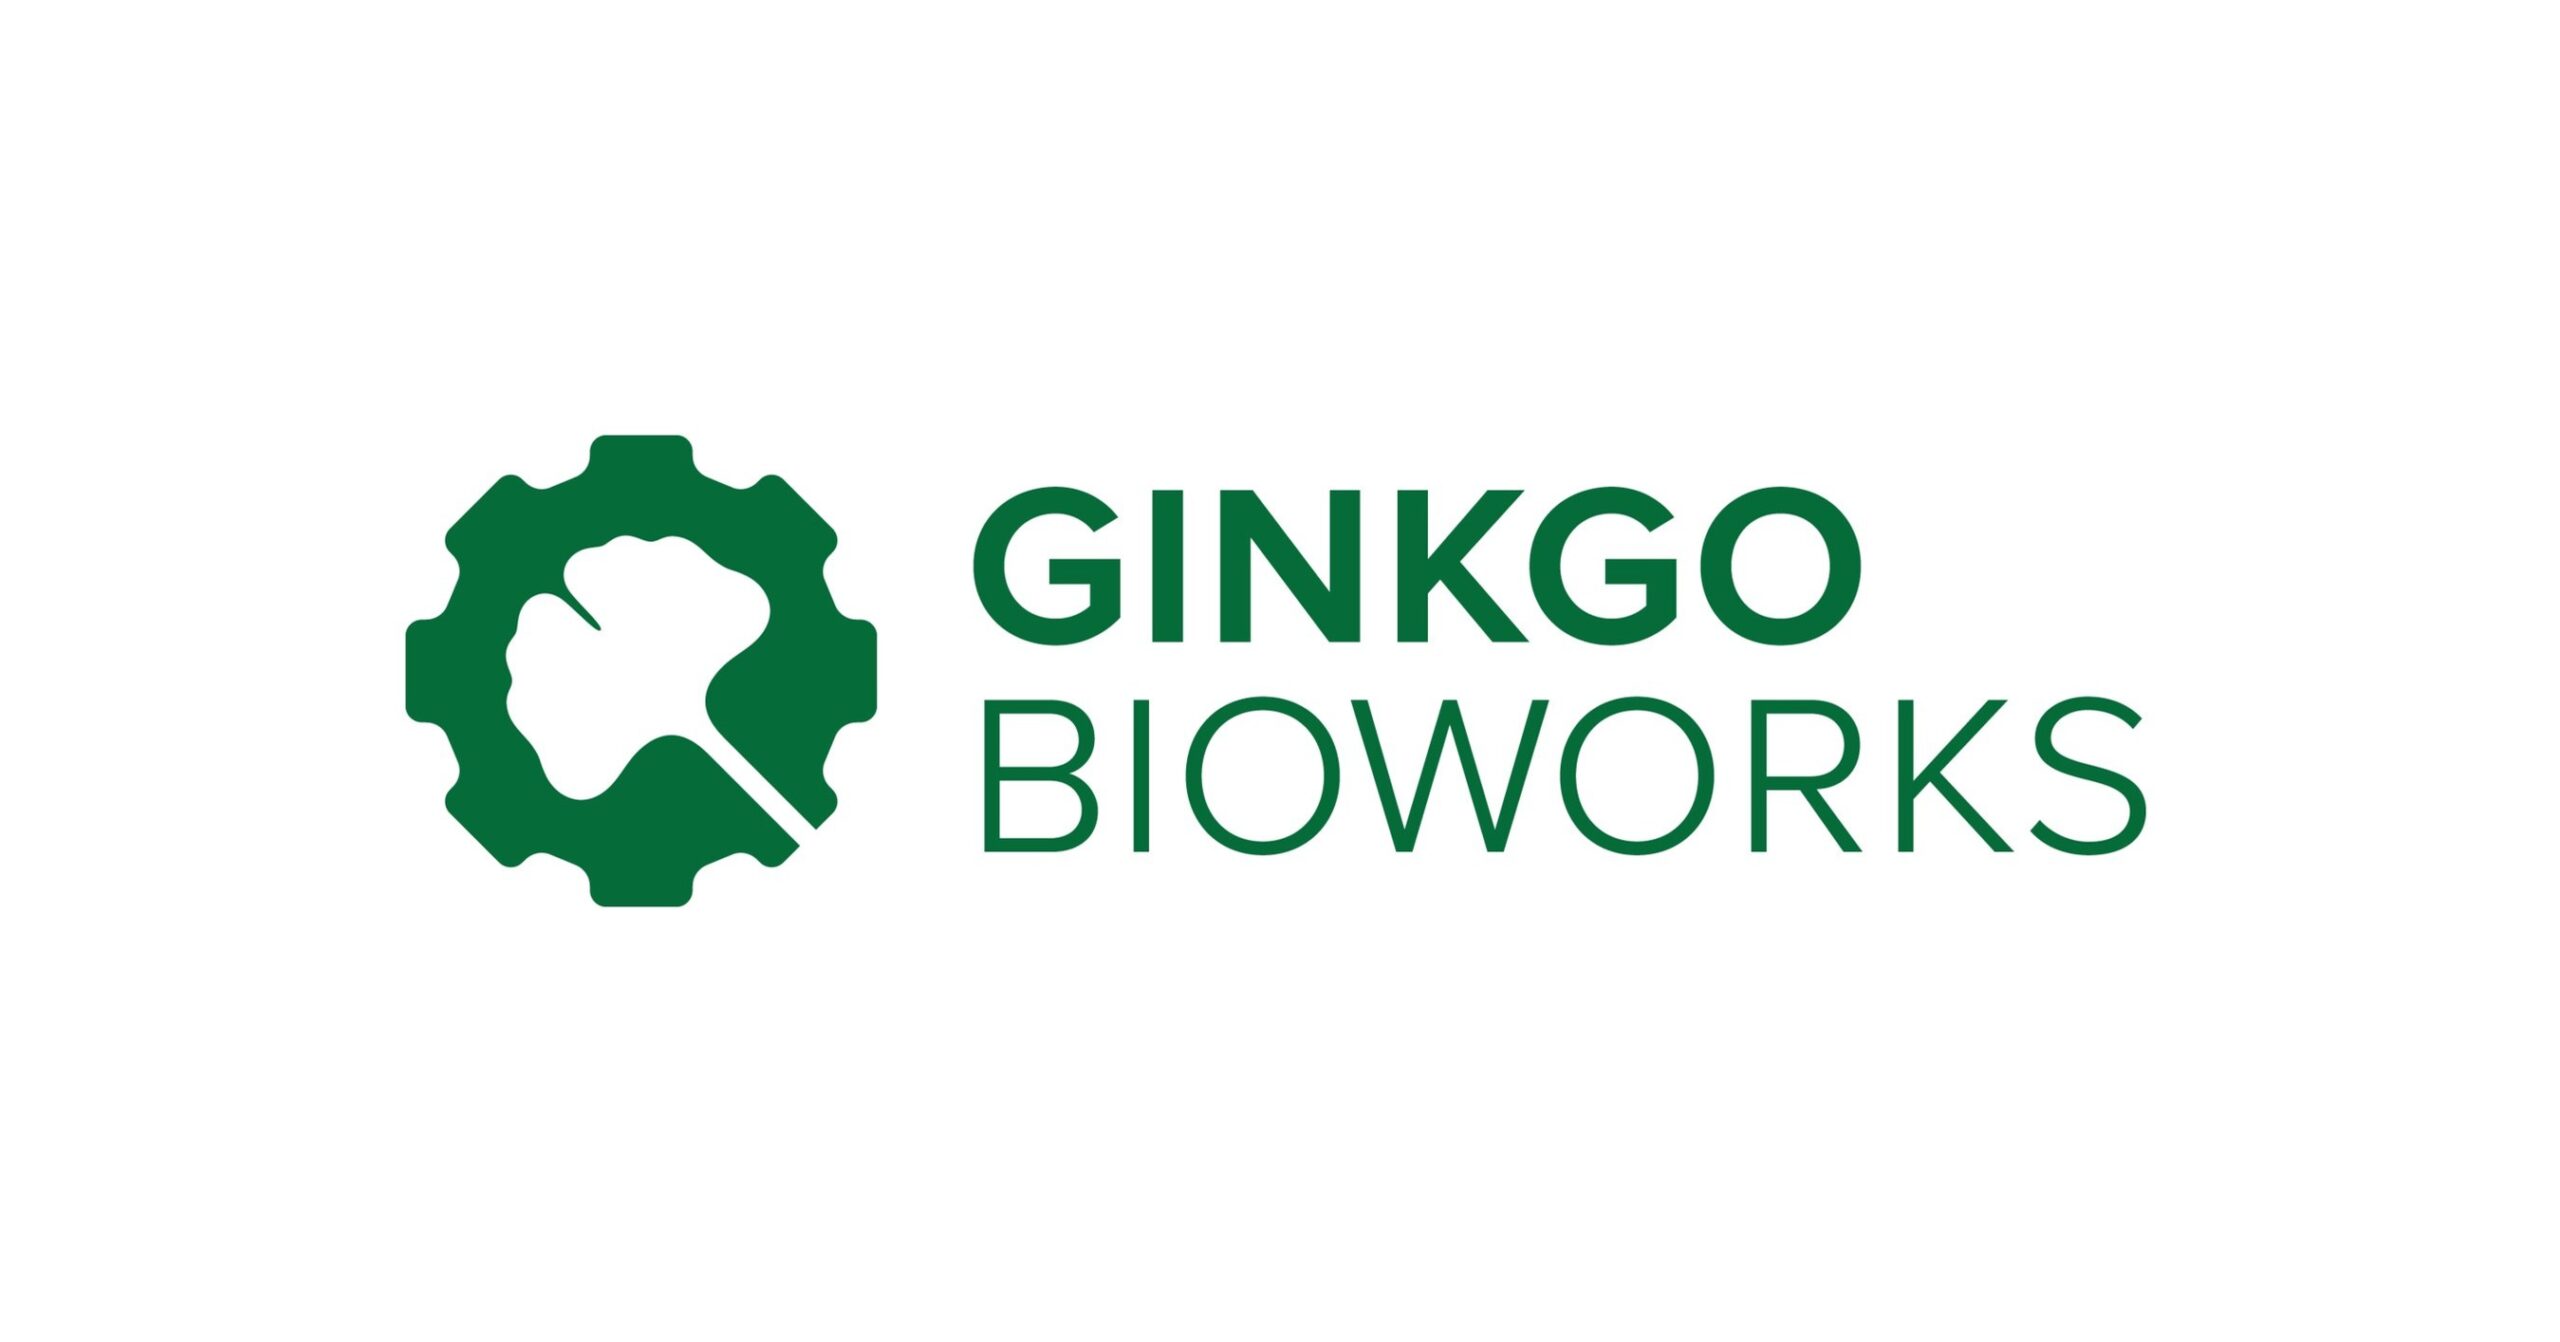 Ginkgo Bioworks Holdings nyse Dna Shares Tumble on Goldman Sachs' Bearish Research Note